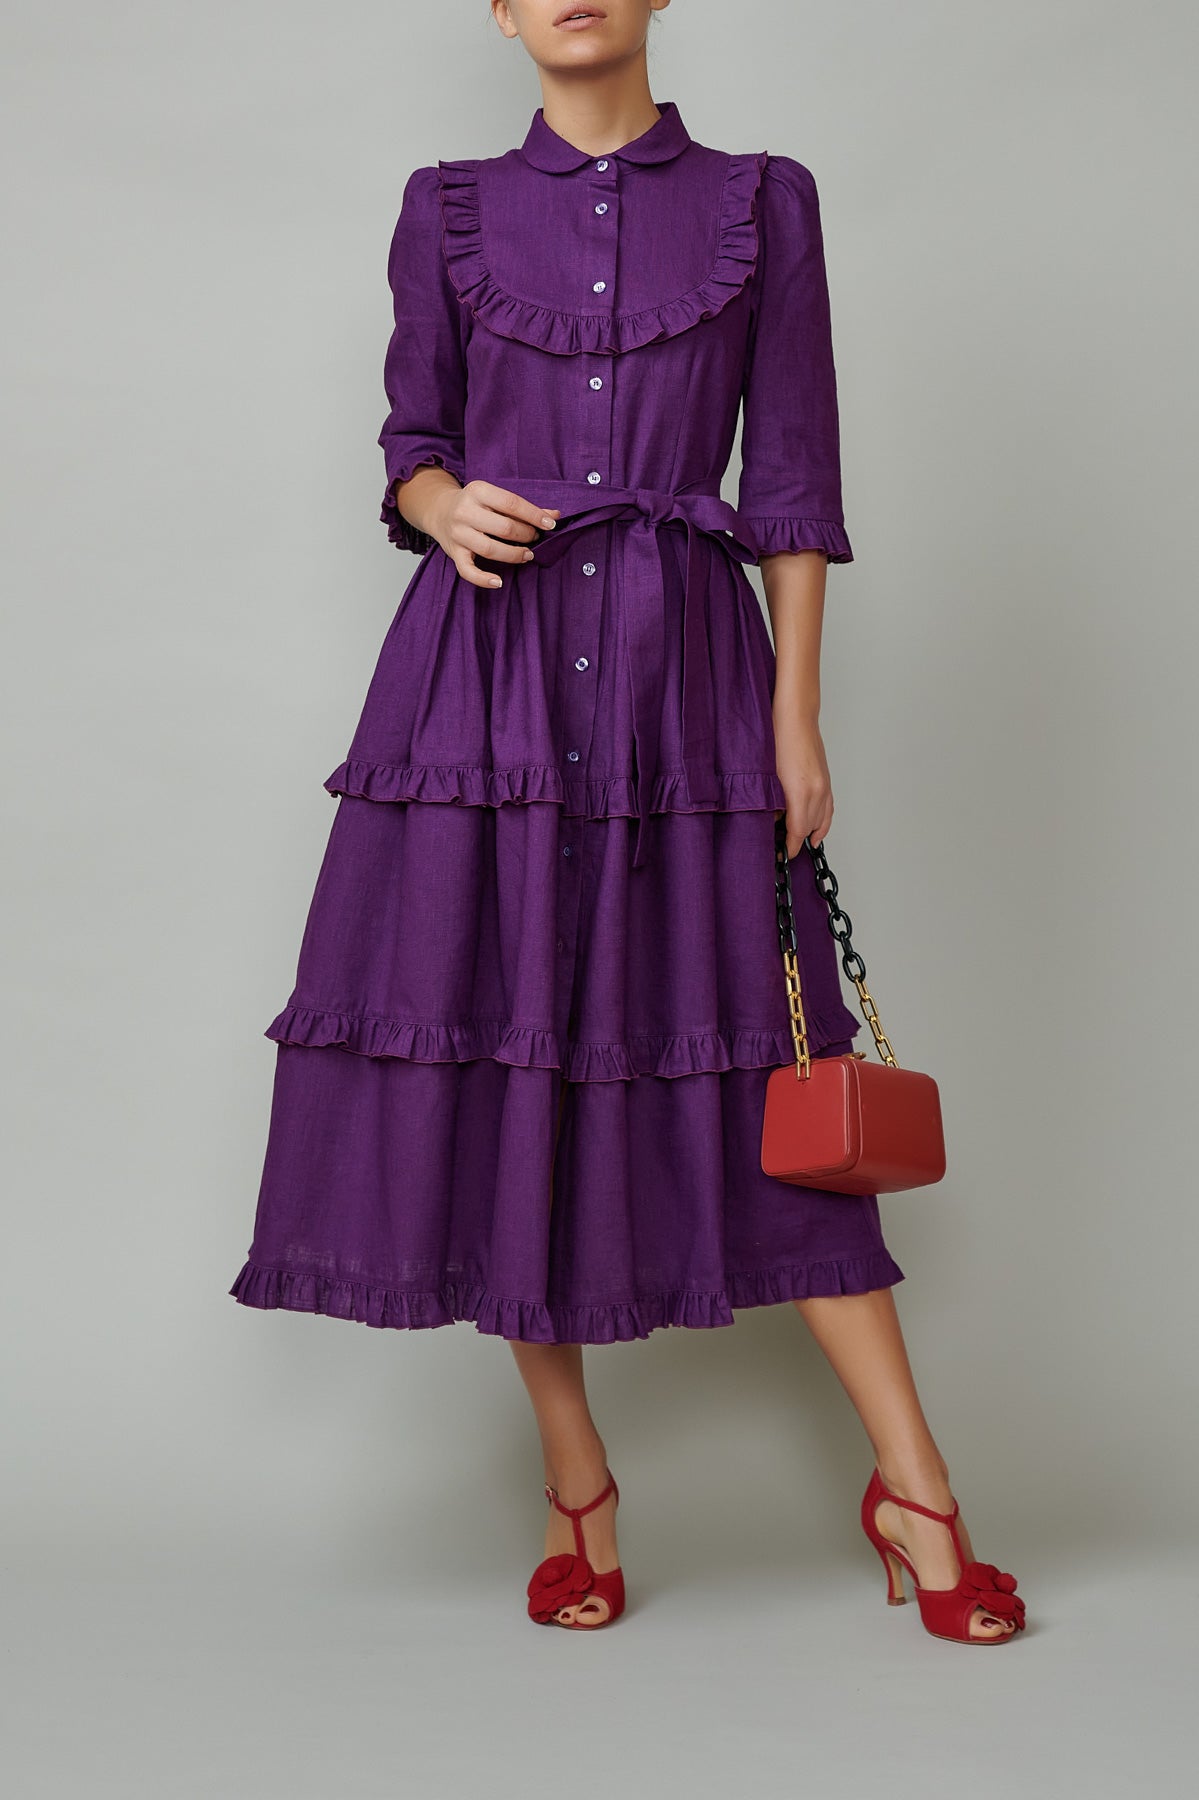 Shirt dress with round placket and ruffles, made of purple linen